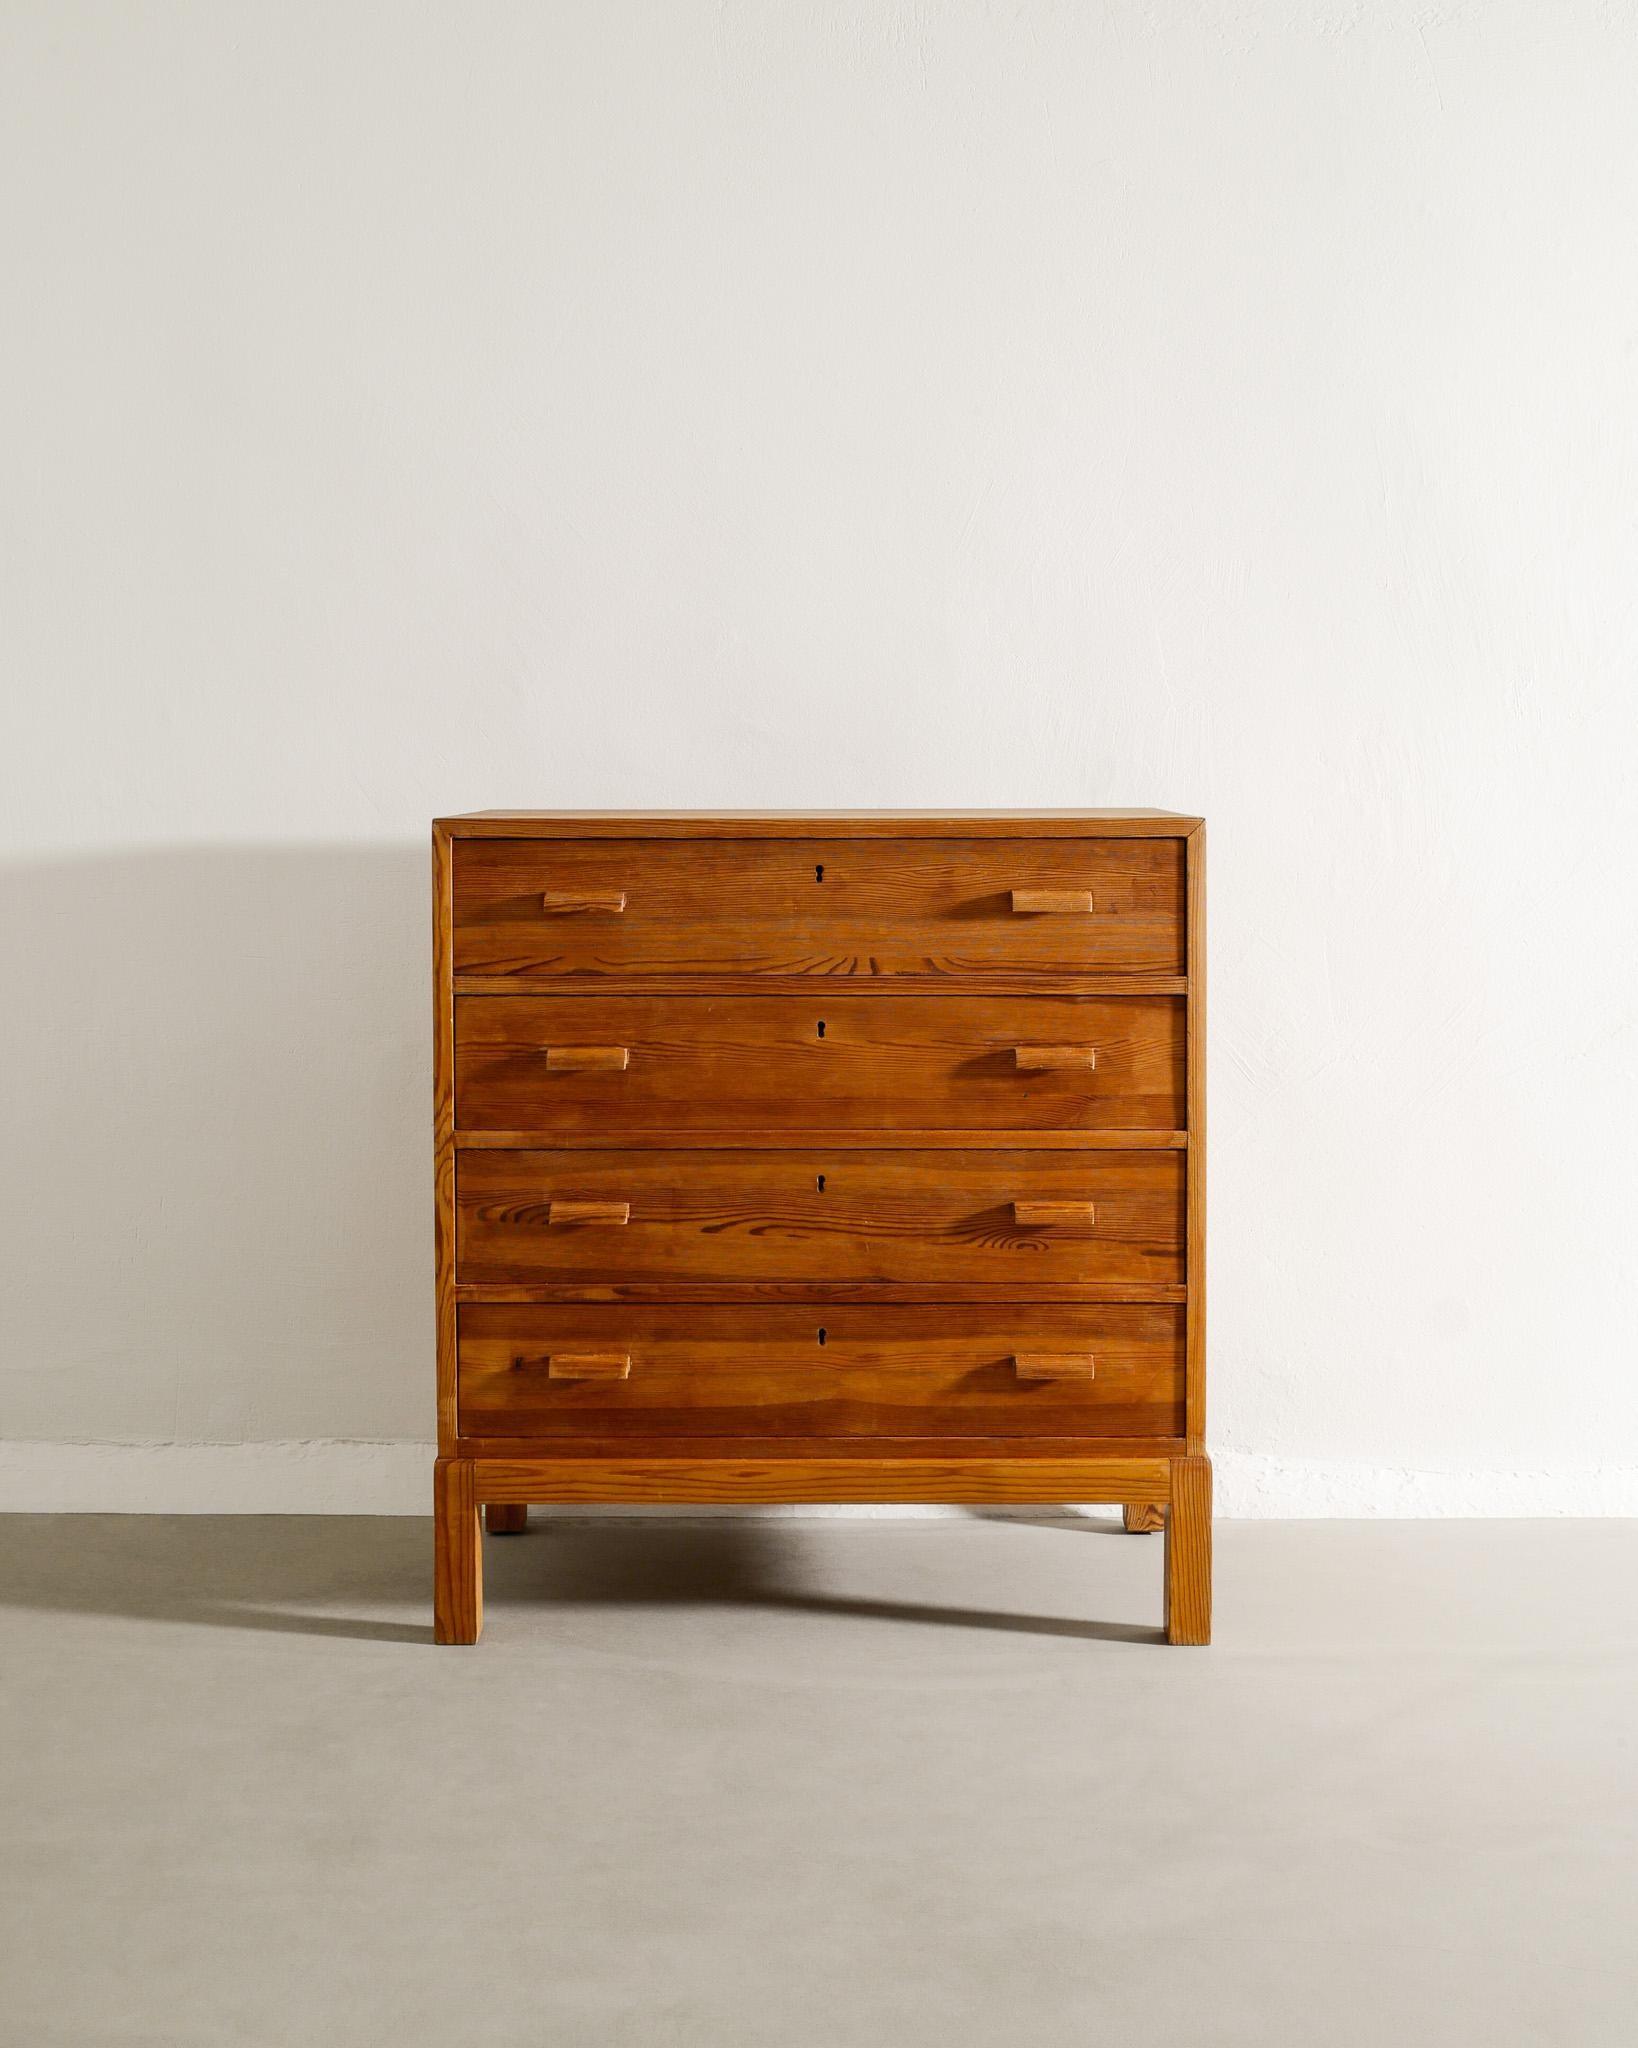 Very rare wooden chest of drawers in pine very similar to Axel Einar Hjorth produced in Sweden 1930s. In good original condition. 

Dimensions: H: 86 cm / 33.85